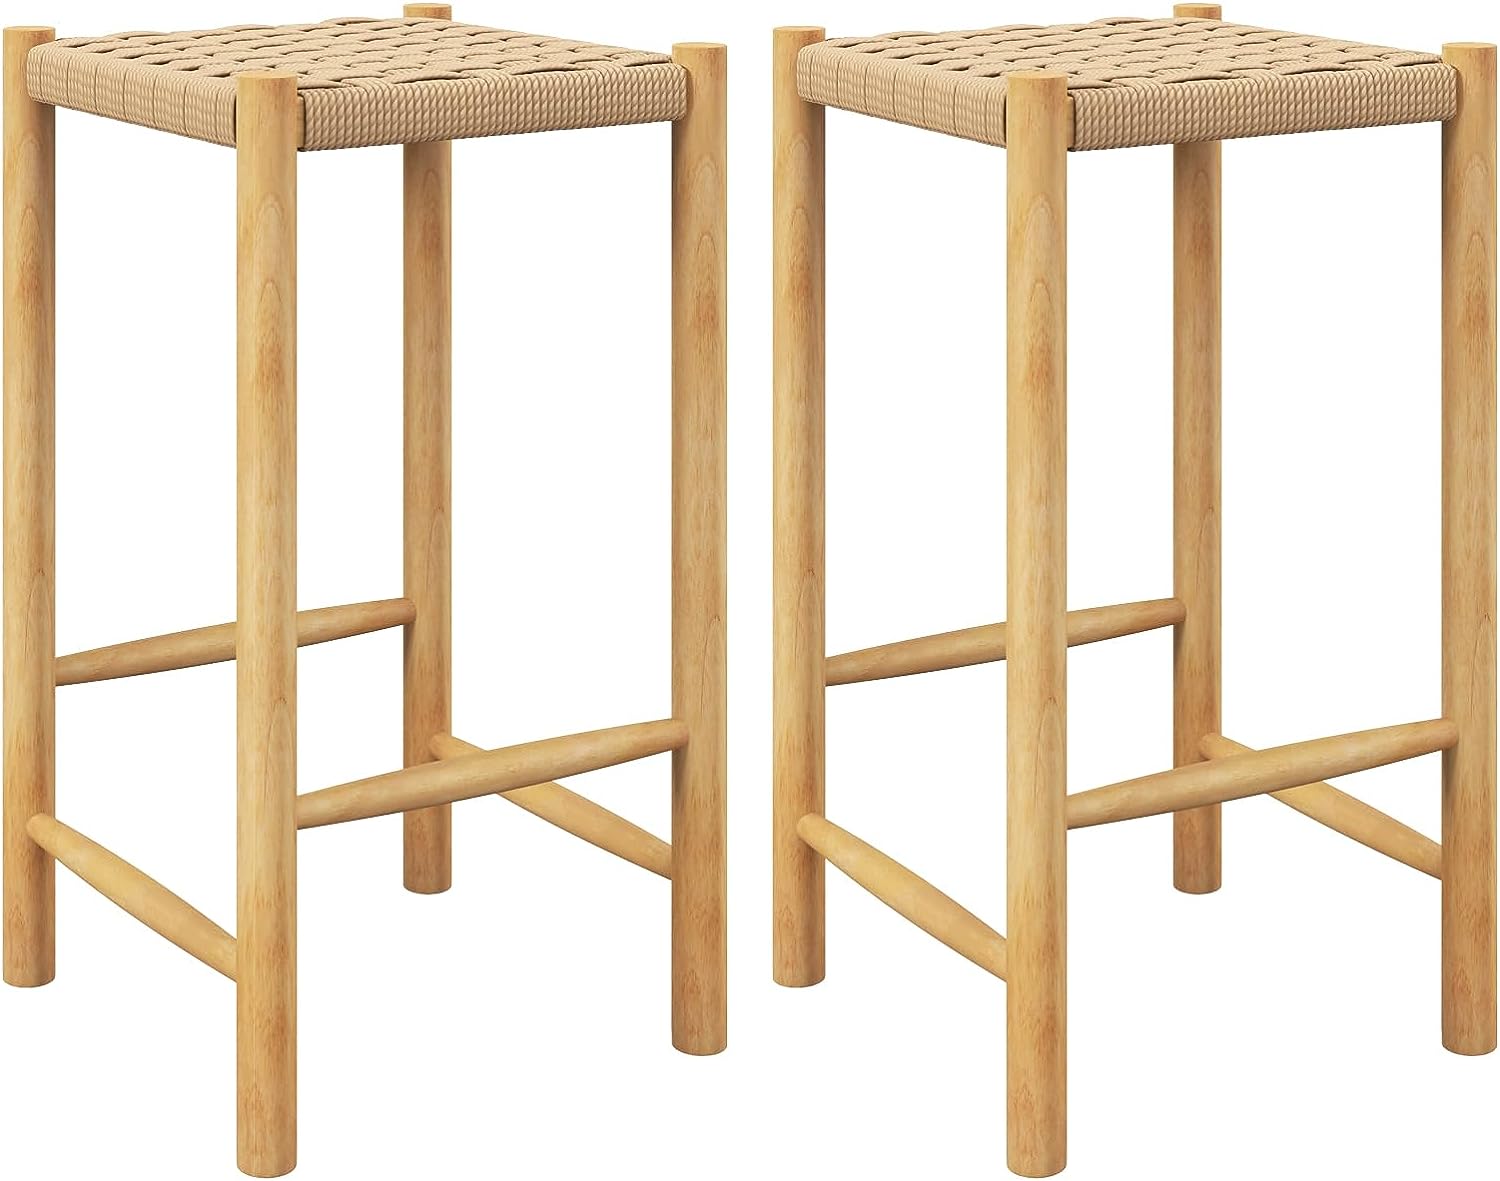 Giantex Wood Stools Set of 2, 18" Tall Boho Backless Stool Chairs with Rubber Wood Legs